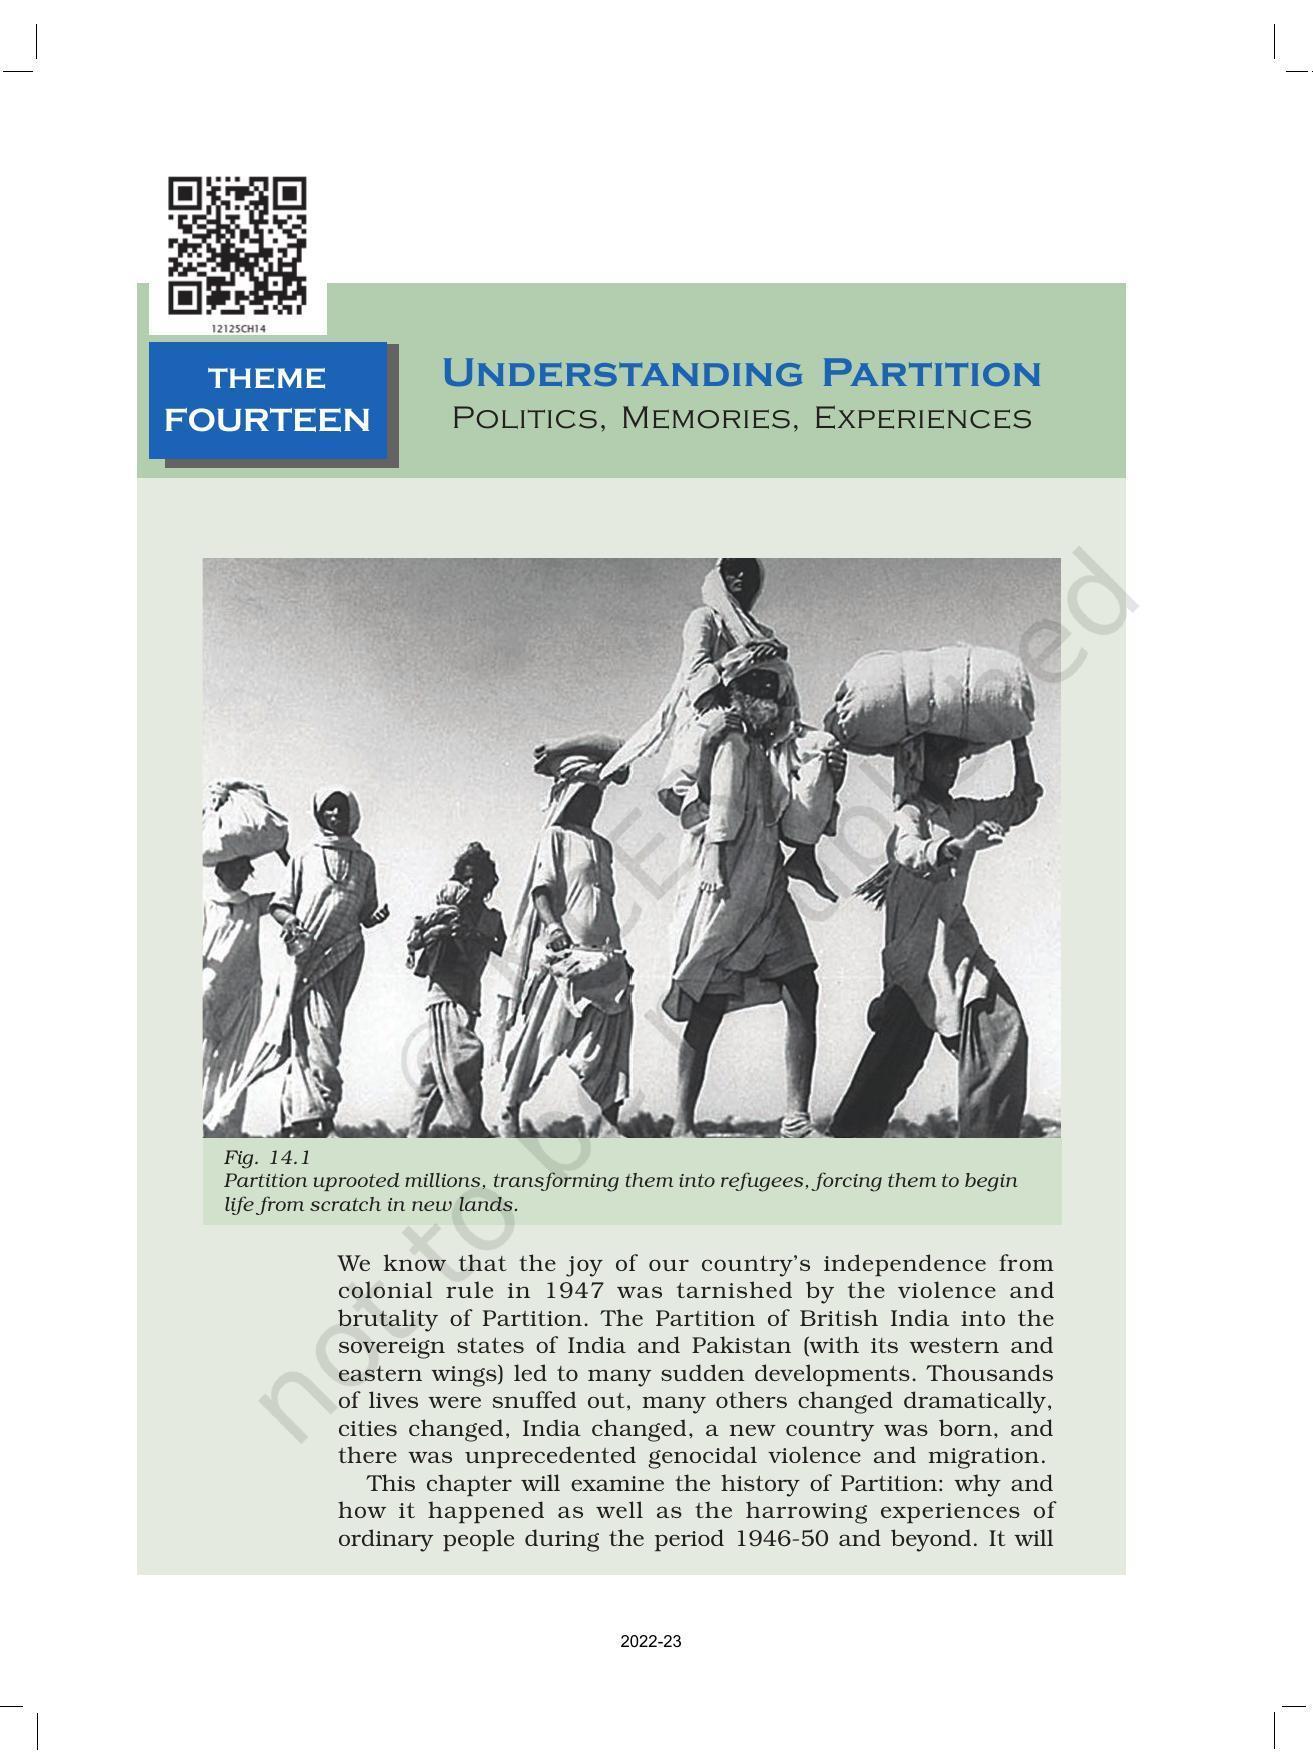 NCERT Book for Class 12 History (Part-III) Chapter 14 Understanding Partition - Page 1